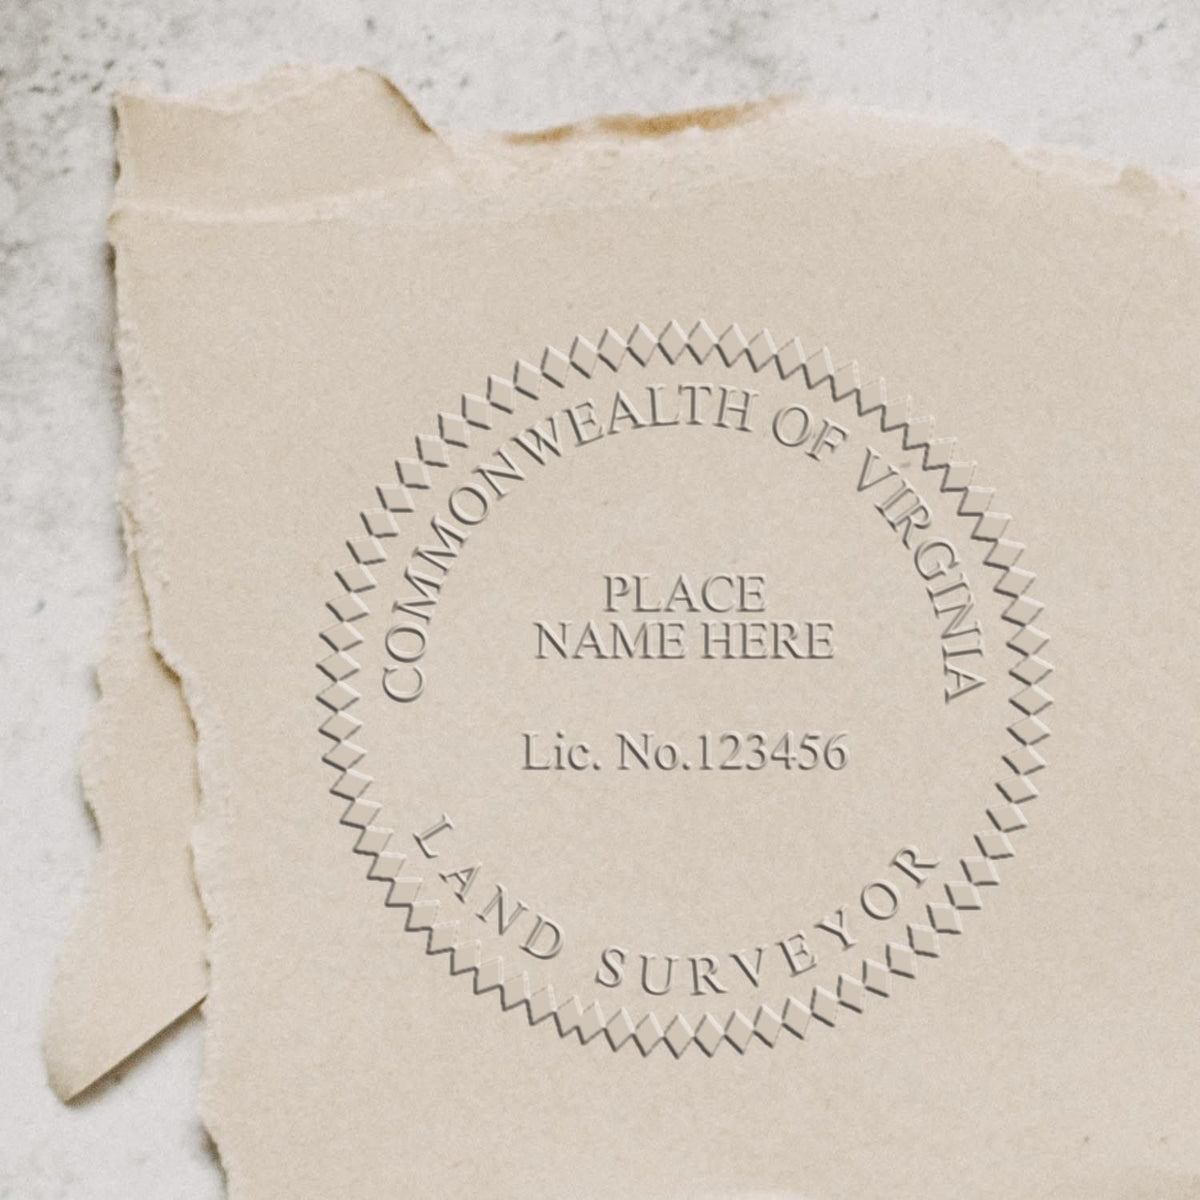 A lifestyle photo showing a stamped image of the State of Virginia Soft Land Surveyor Embossing Seal on a piece of paper